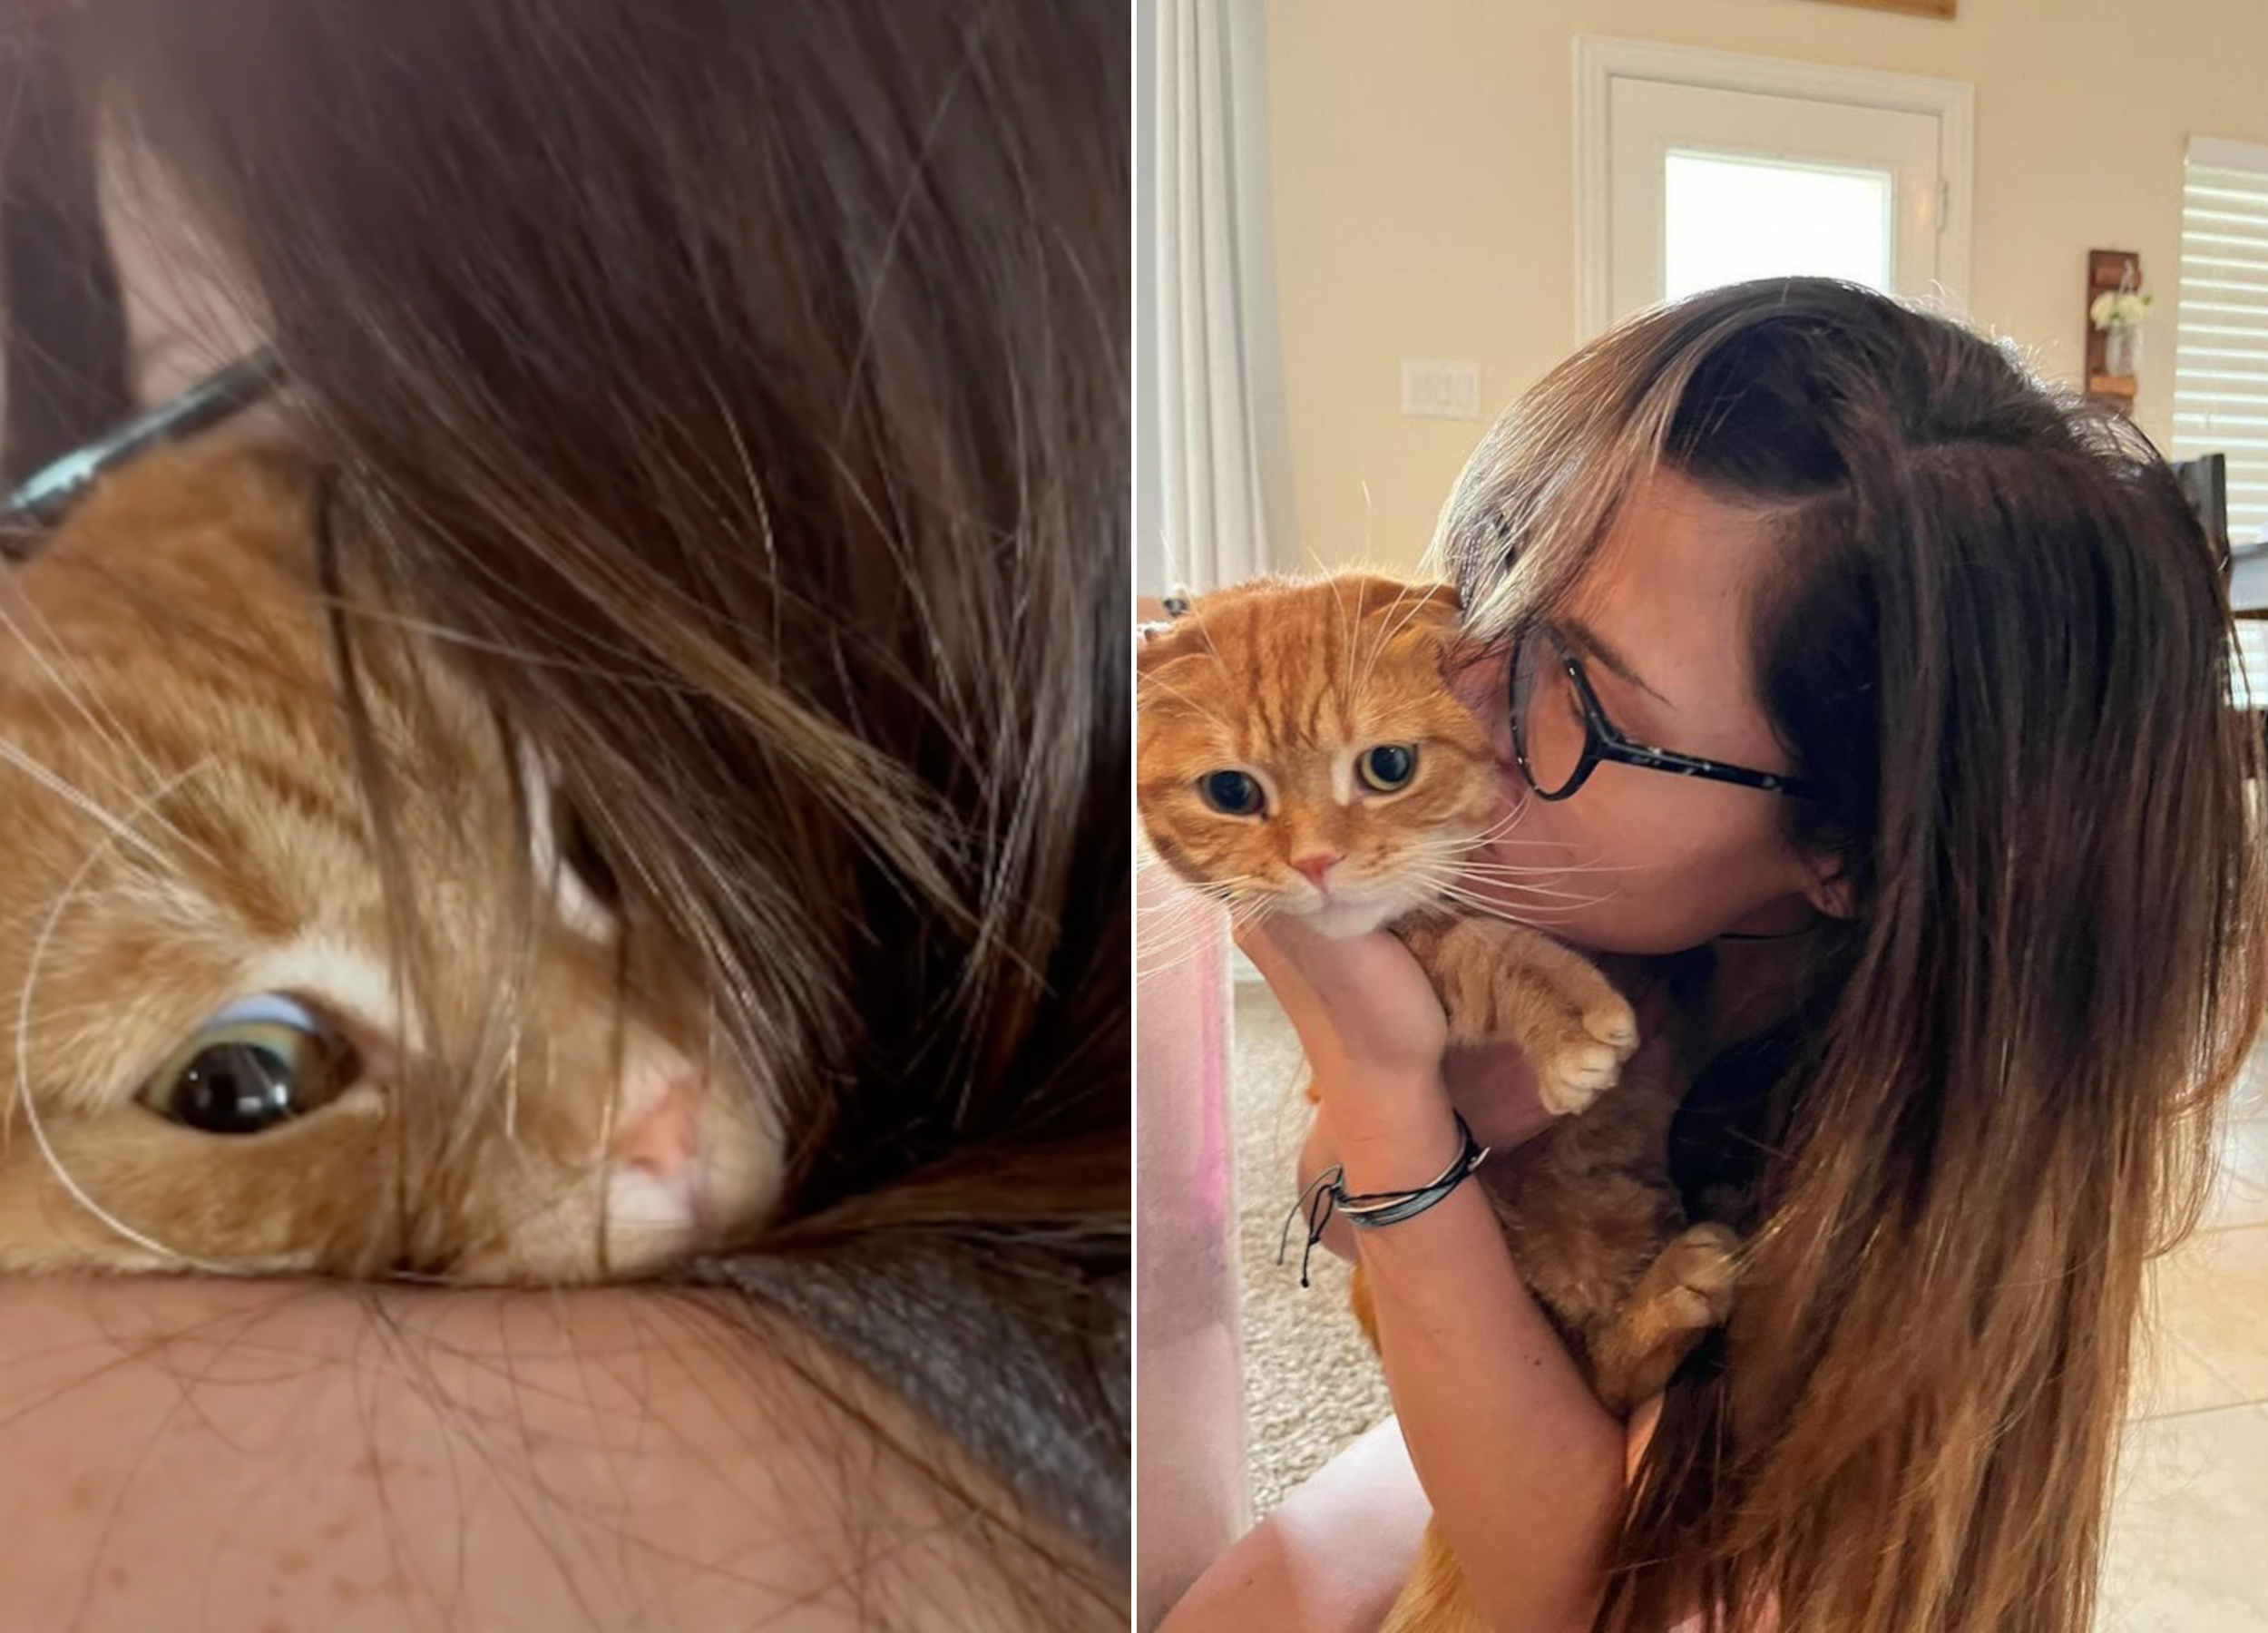 So Dramatic': Cat's Needy Reaction to Having Claws Trimmed Wins Internet